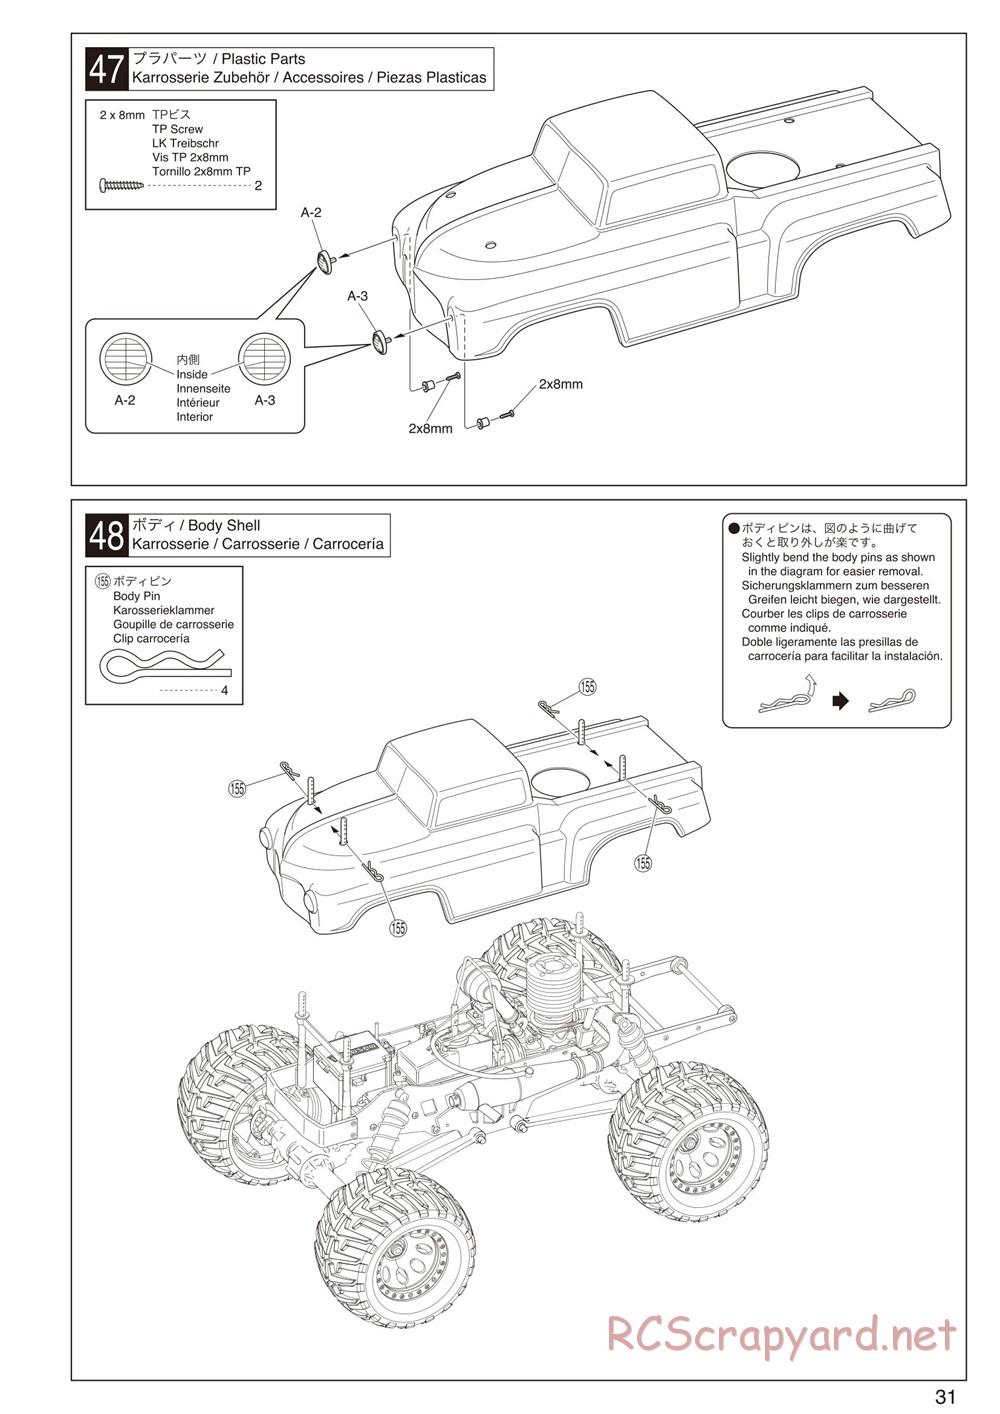 Kyosho - Mad Force Kruiser 2.0 - Manual - Page 31